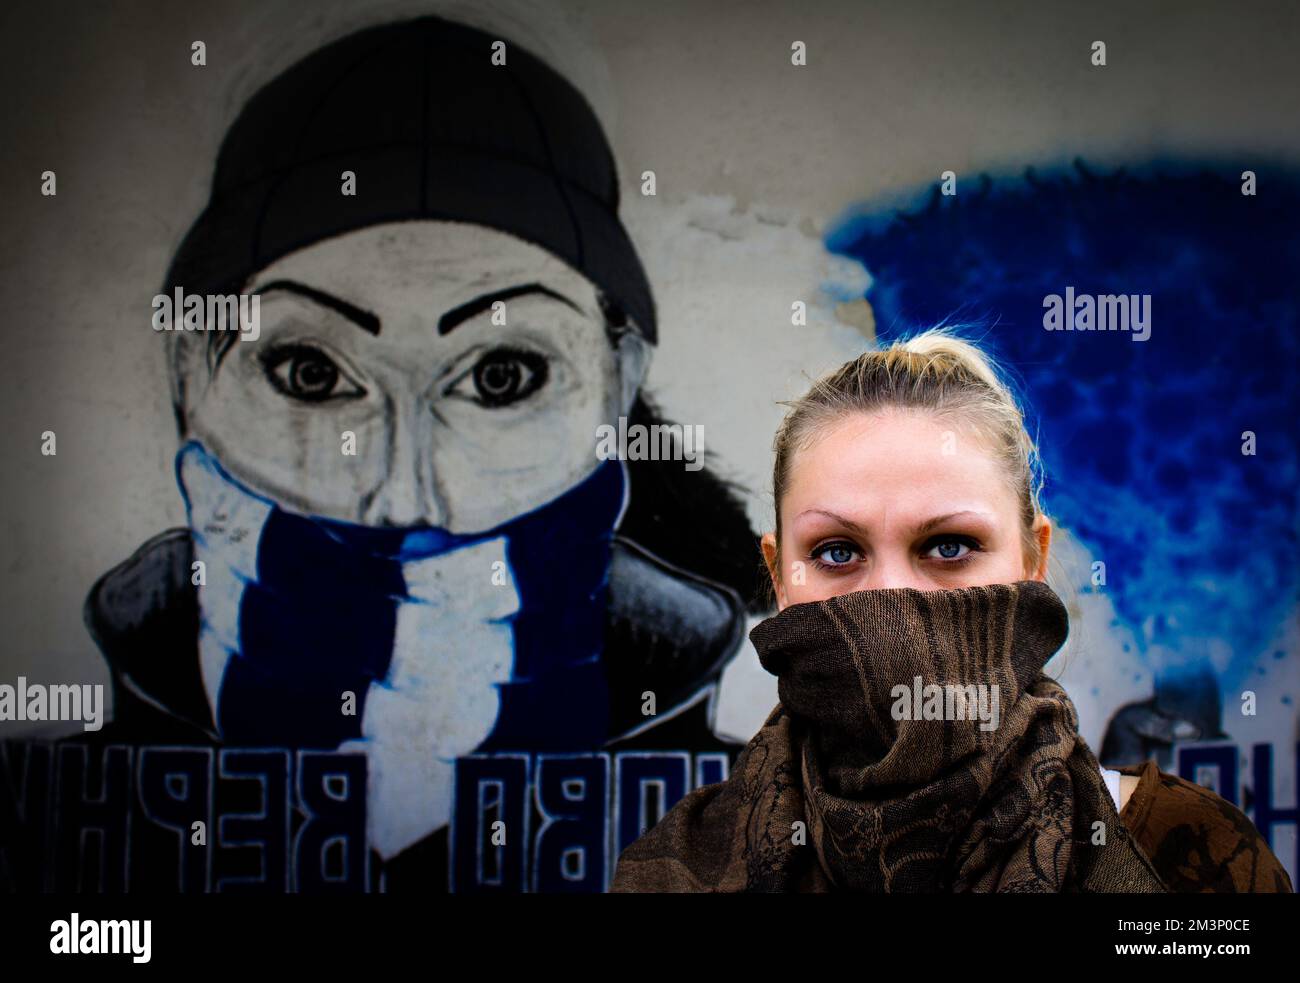 A young female with a mask standing near street art that looks like her in Kumanovo, Macedonia Stock Photo